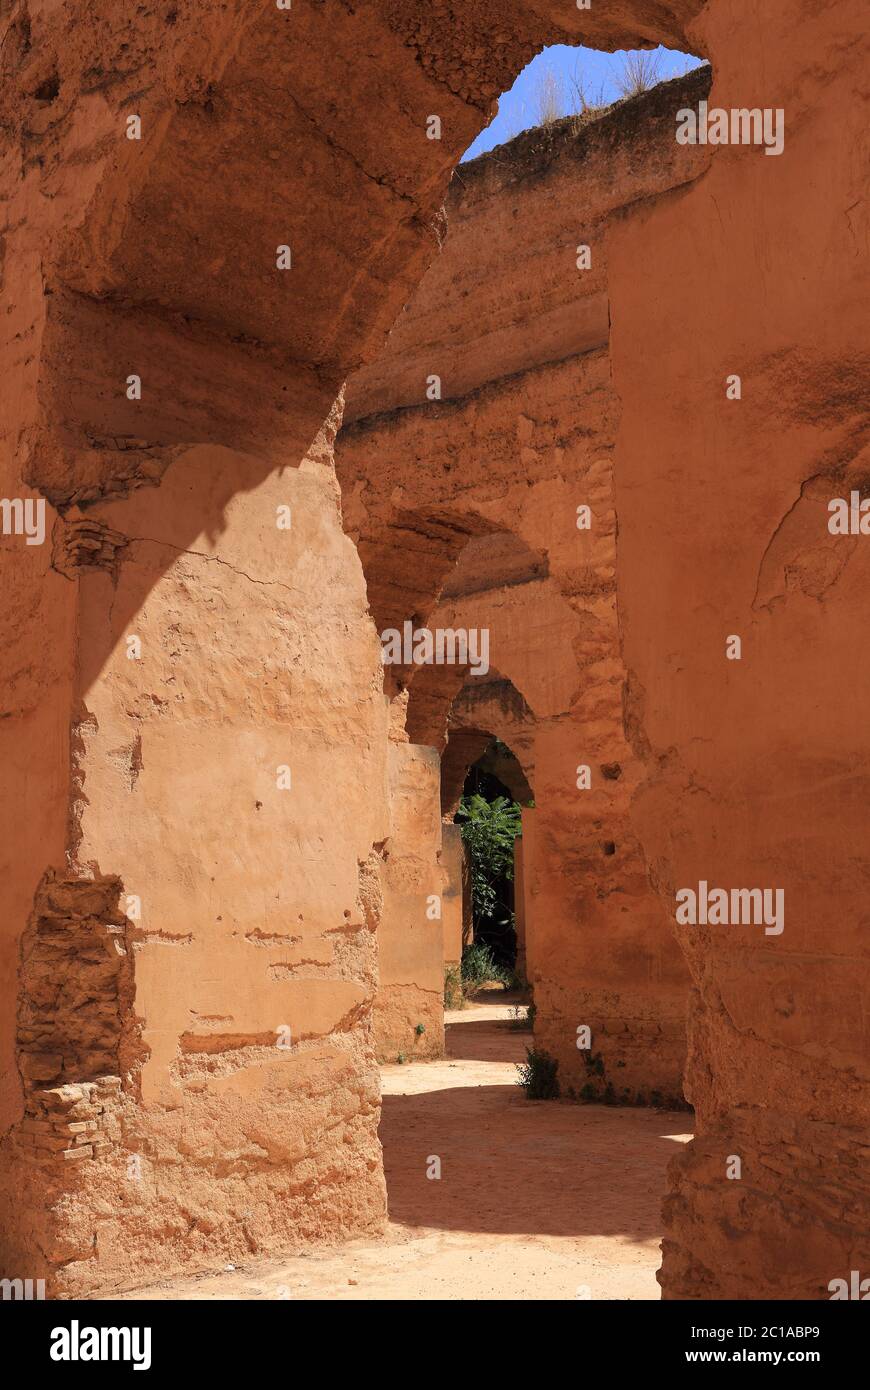 The medieval ruined arches of the massive Heri es-Souani Royal Stables and Granaries of Moulay Ismail in the Imperial City of Meknes, Morocco. Stock Photo